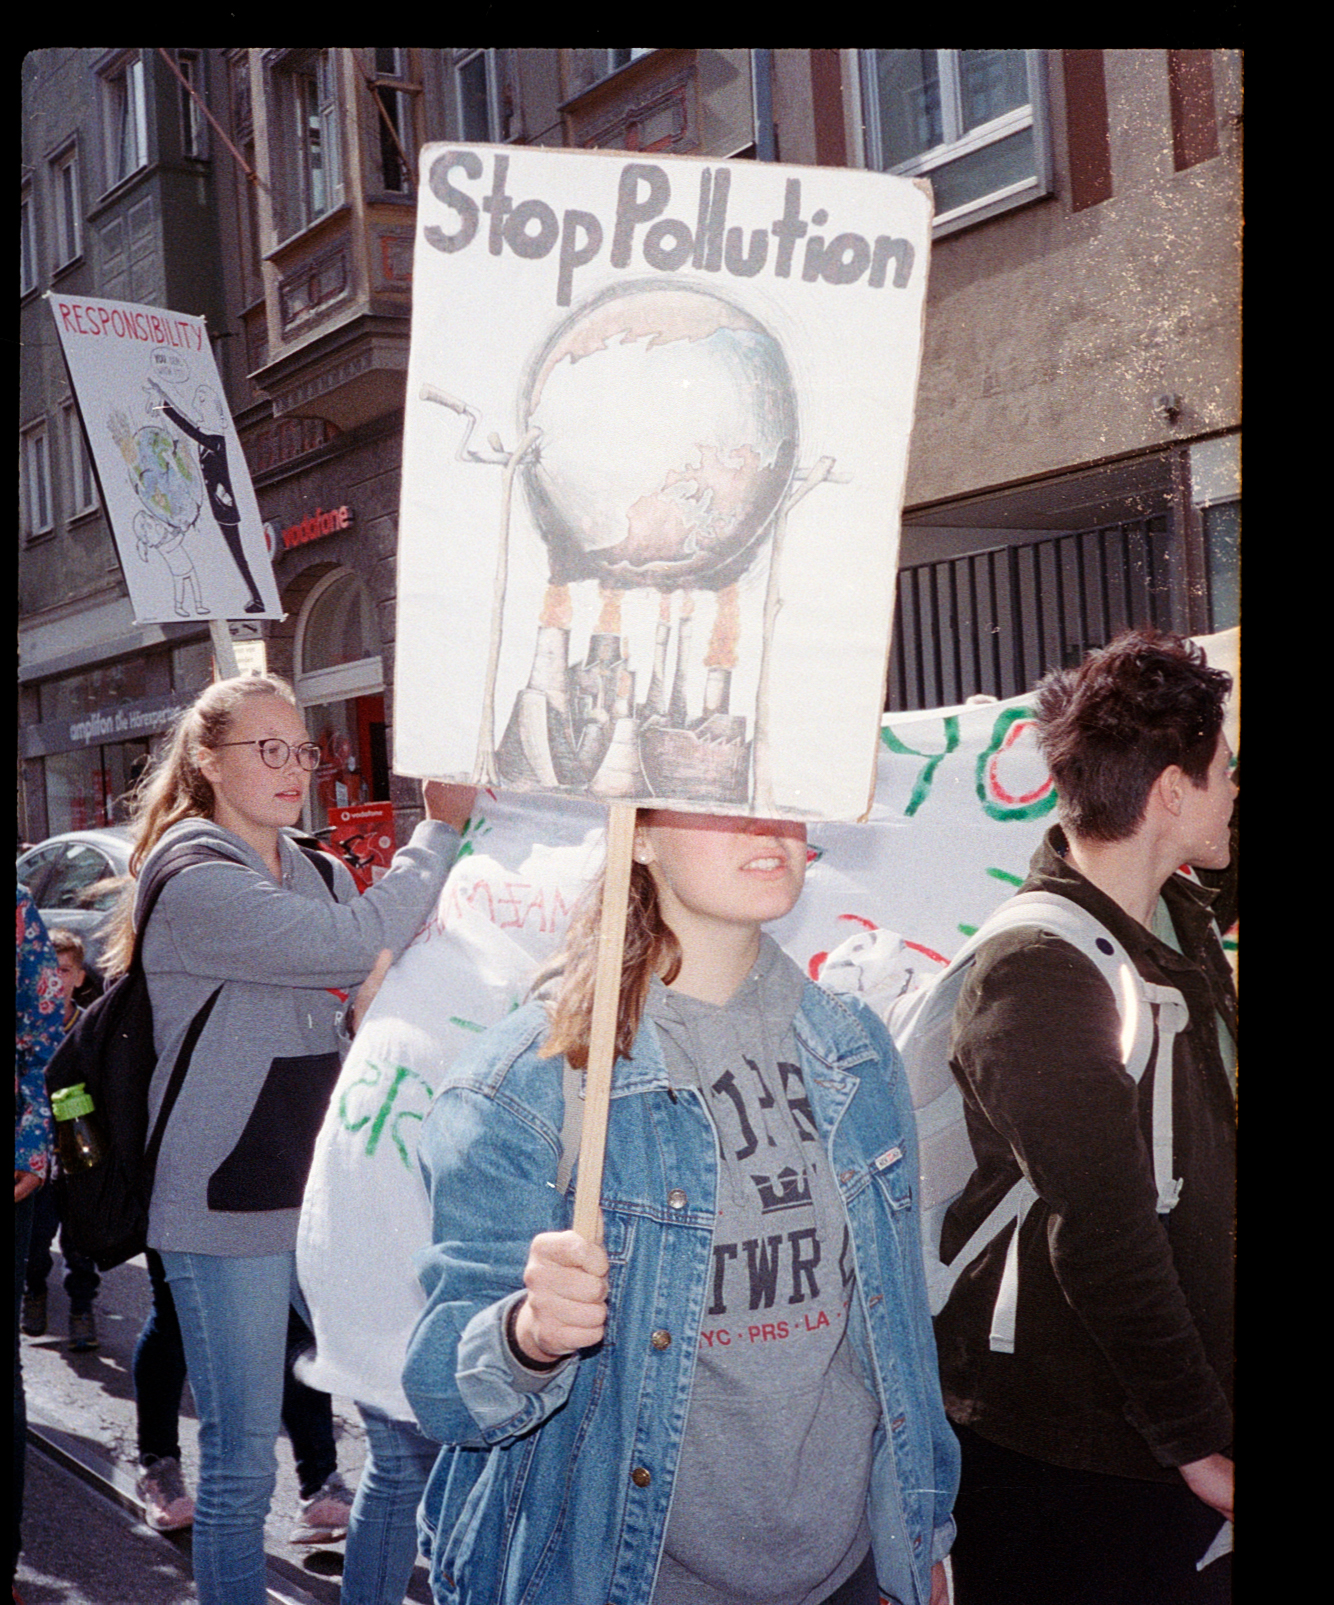 Fridays for future Mädchen stop pollution